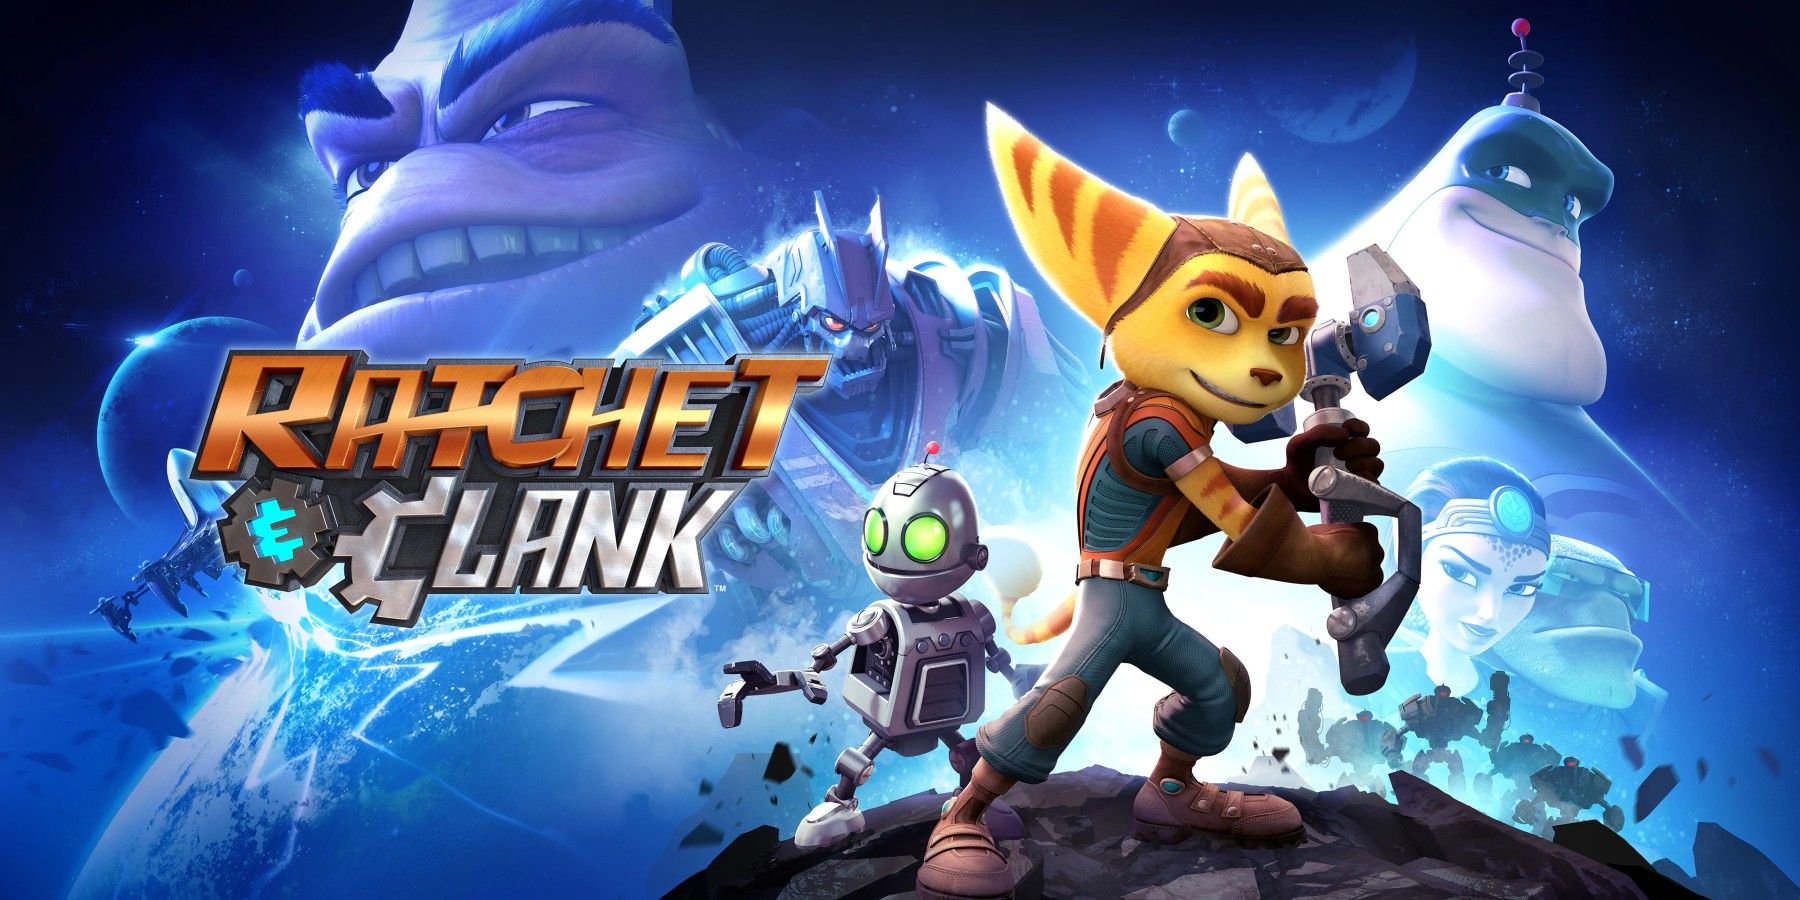 ratchet and clank giving away free weapon eight years after launch